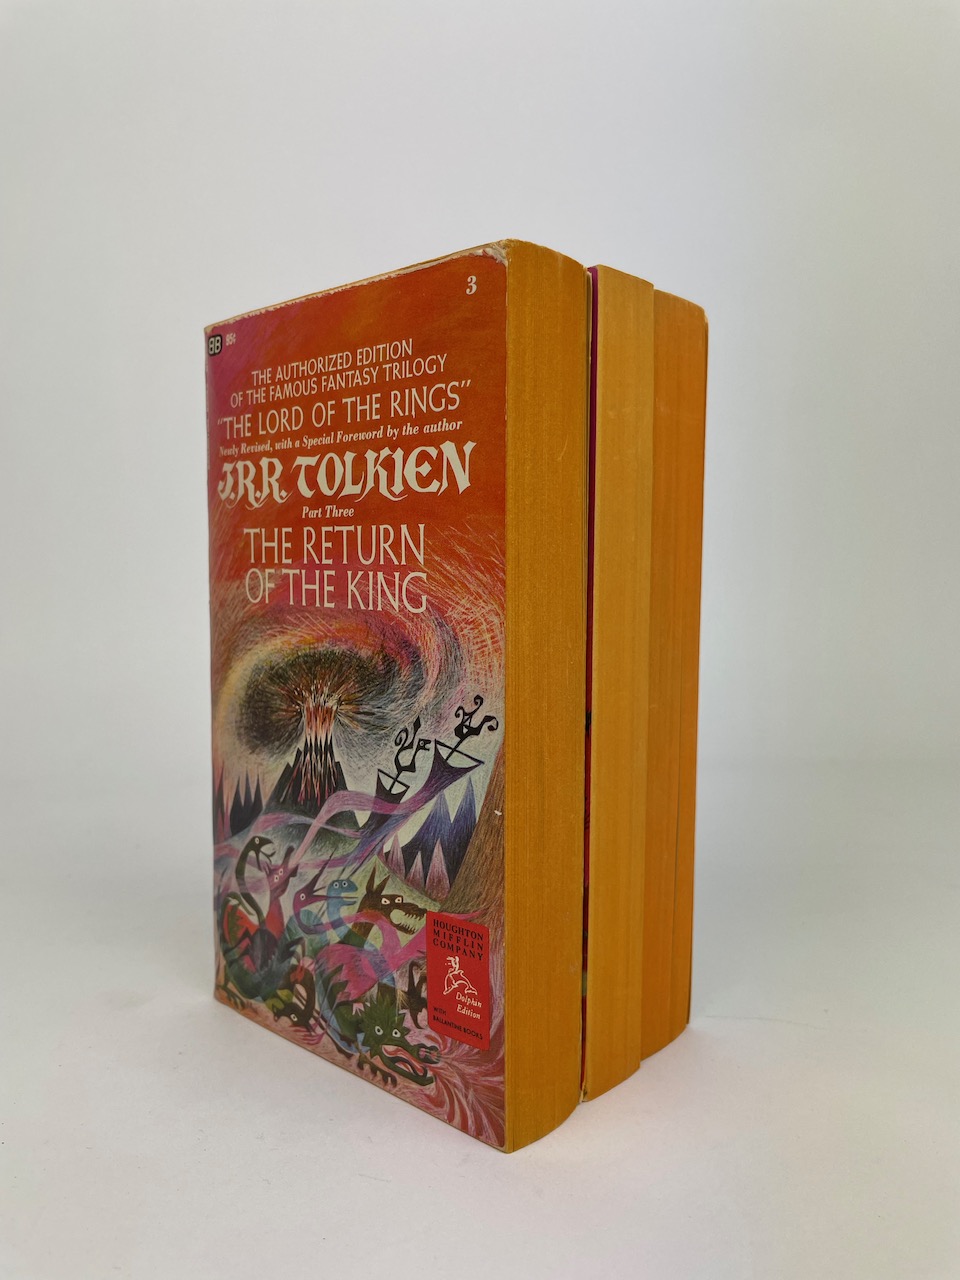 The Lord of the Rings from 1968, Authorized Edition in Black, White and Red Publishers Slipcase 11